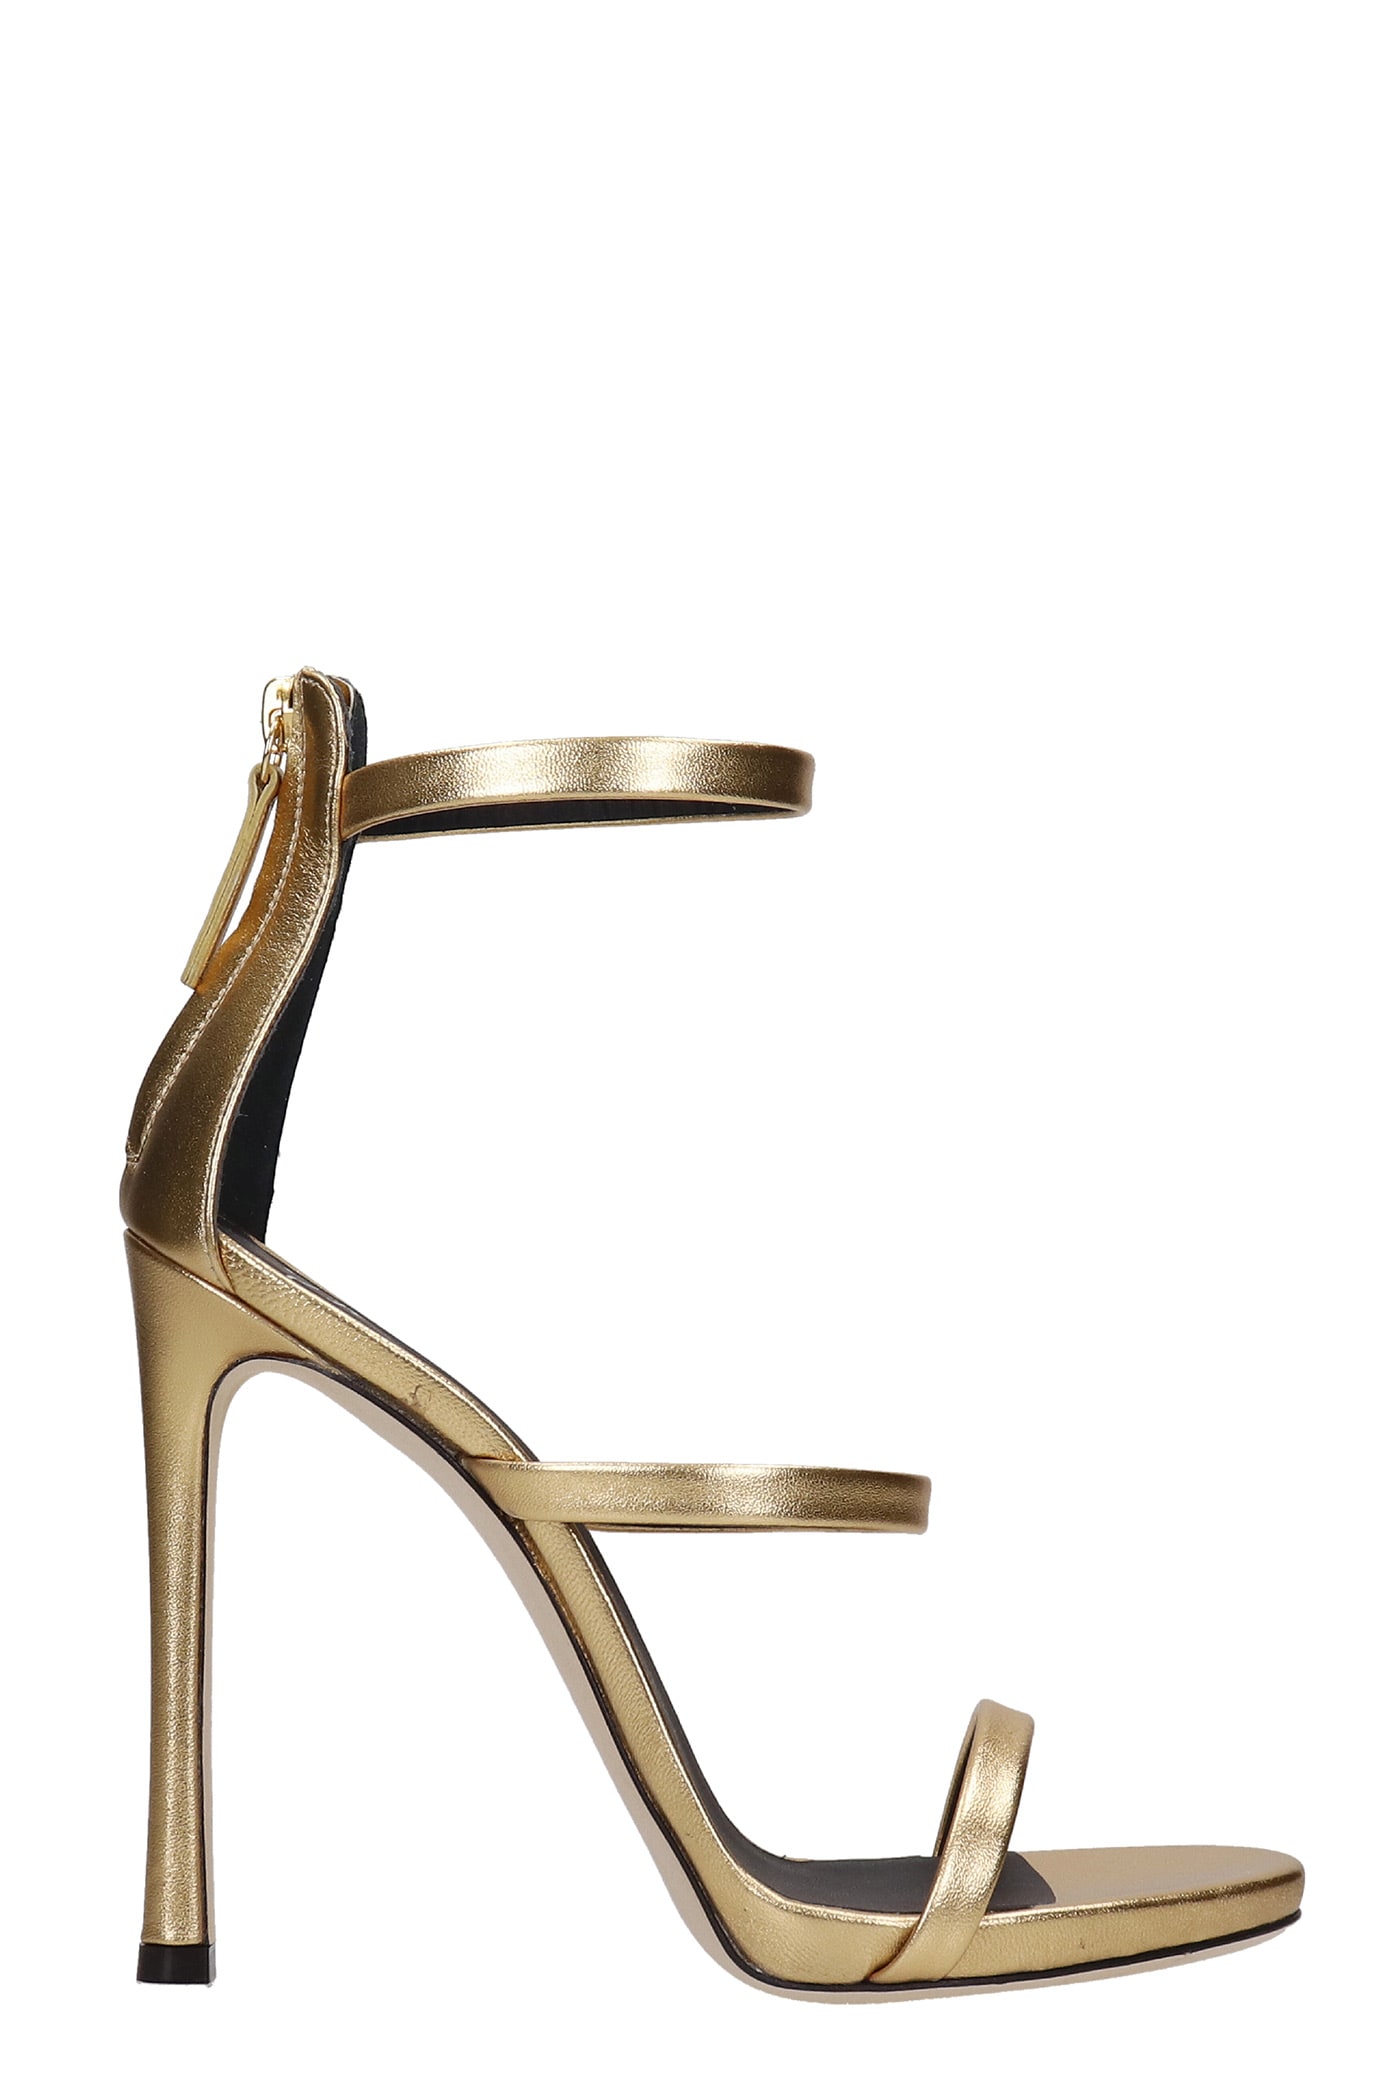 Giuseppe Zanotti Harmony Sandals In Gold Patent Leather